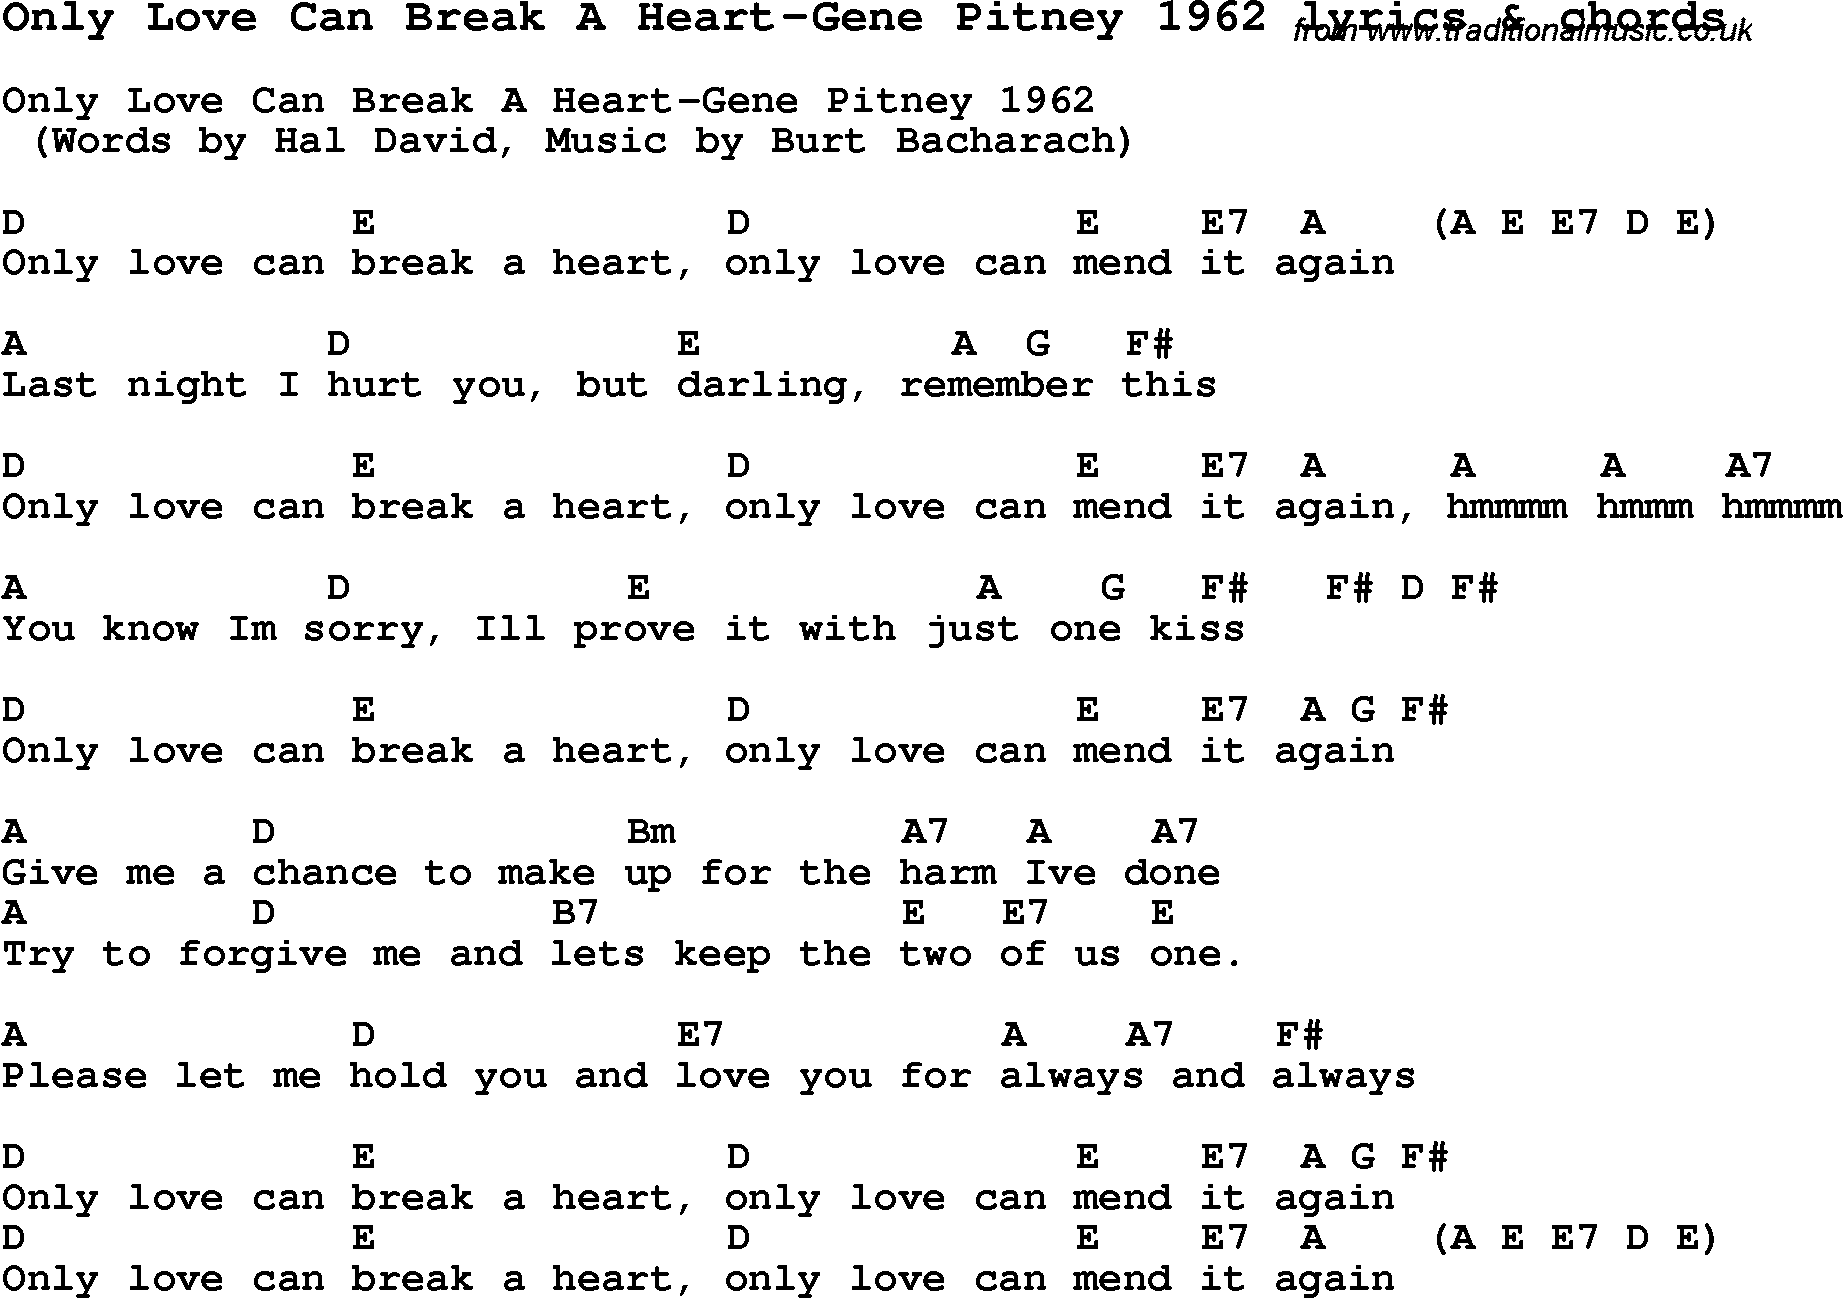 Love Song Lyrics for: Only Love Can Break A Heart-Gene Pitney 1962 with chords for Ukulele, Guitar Banjo etc.